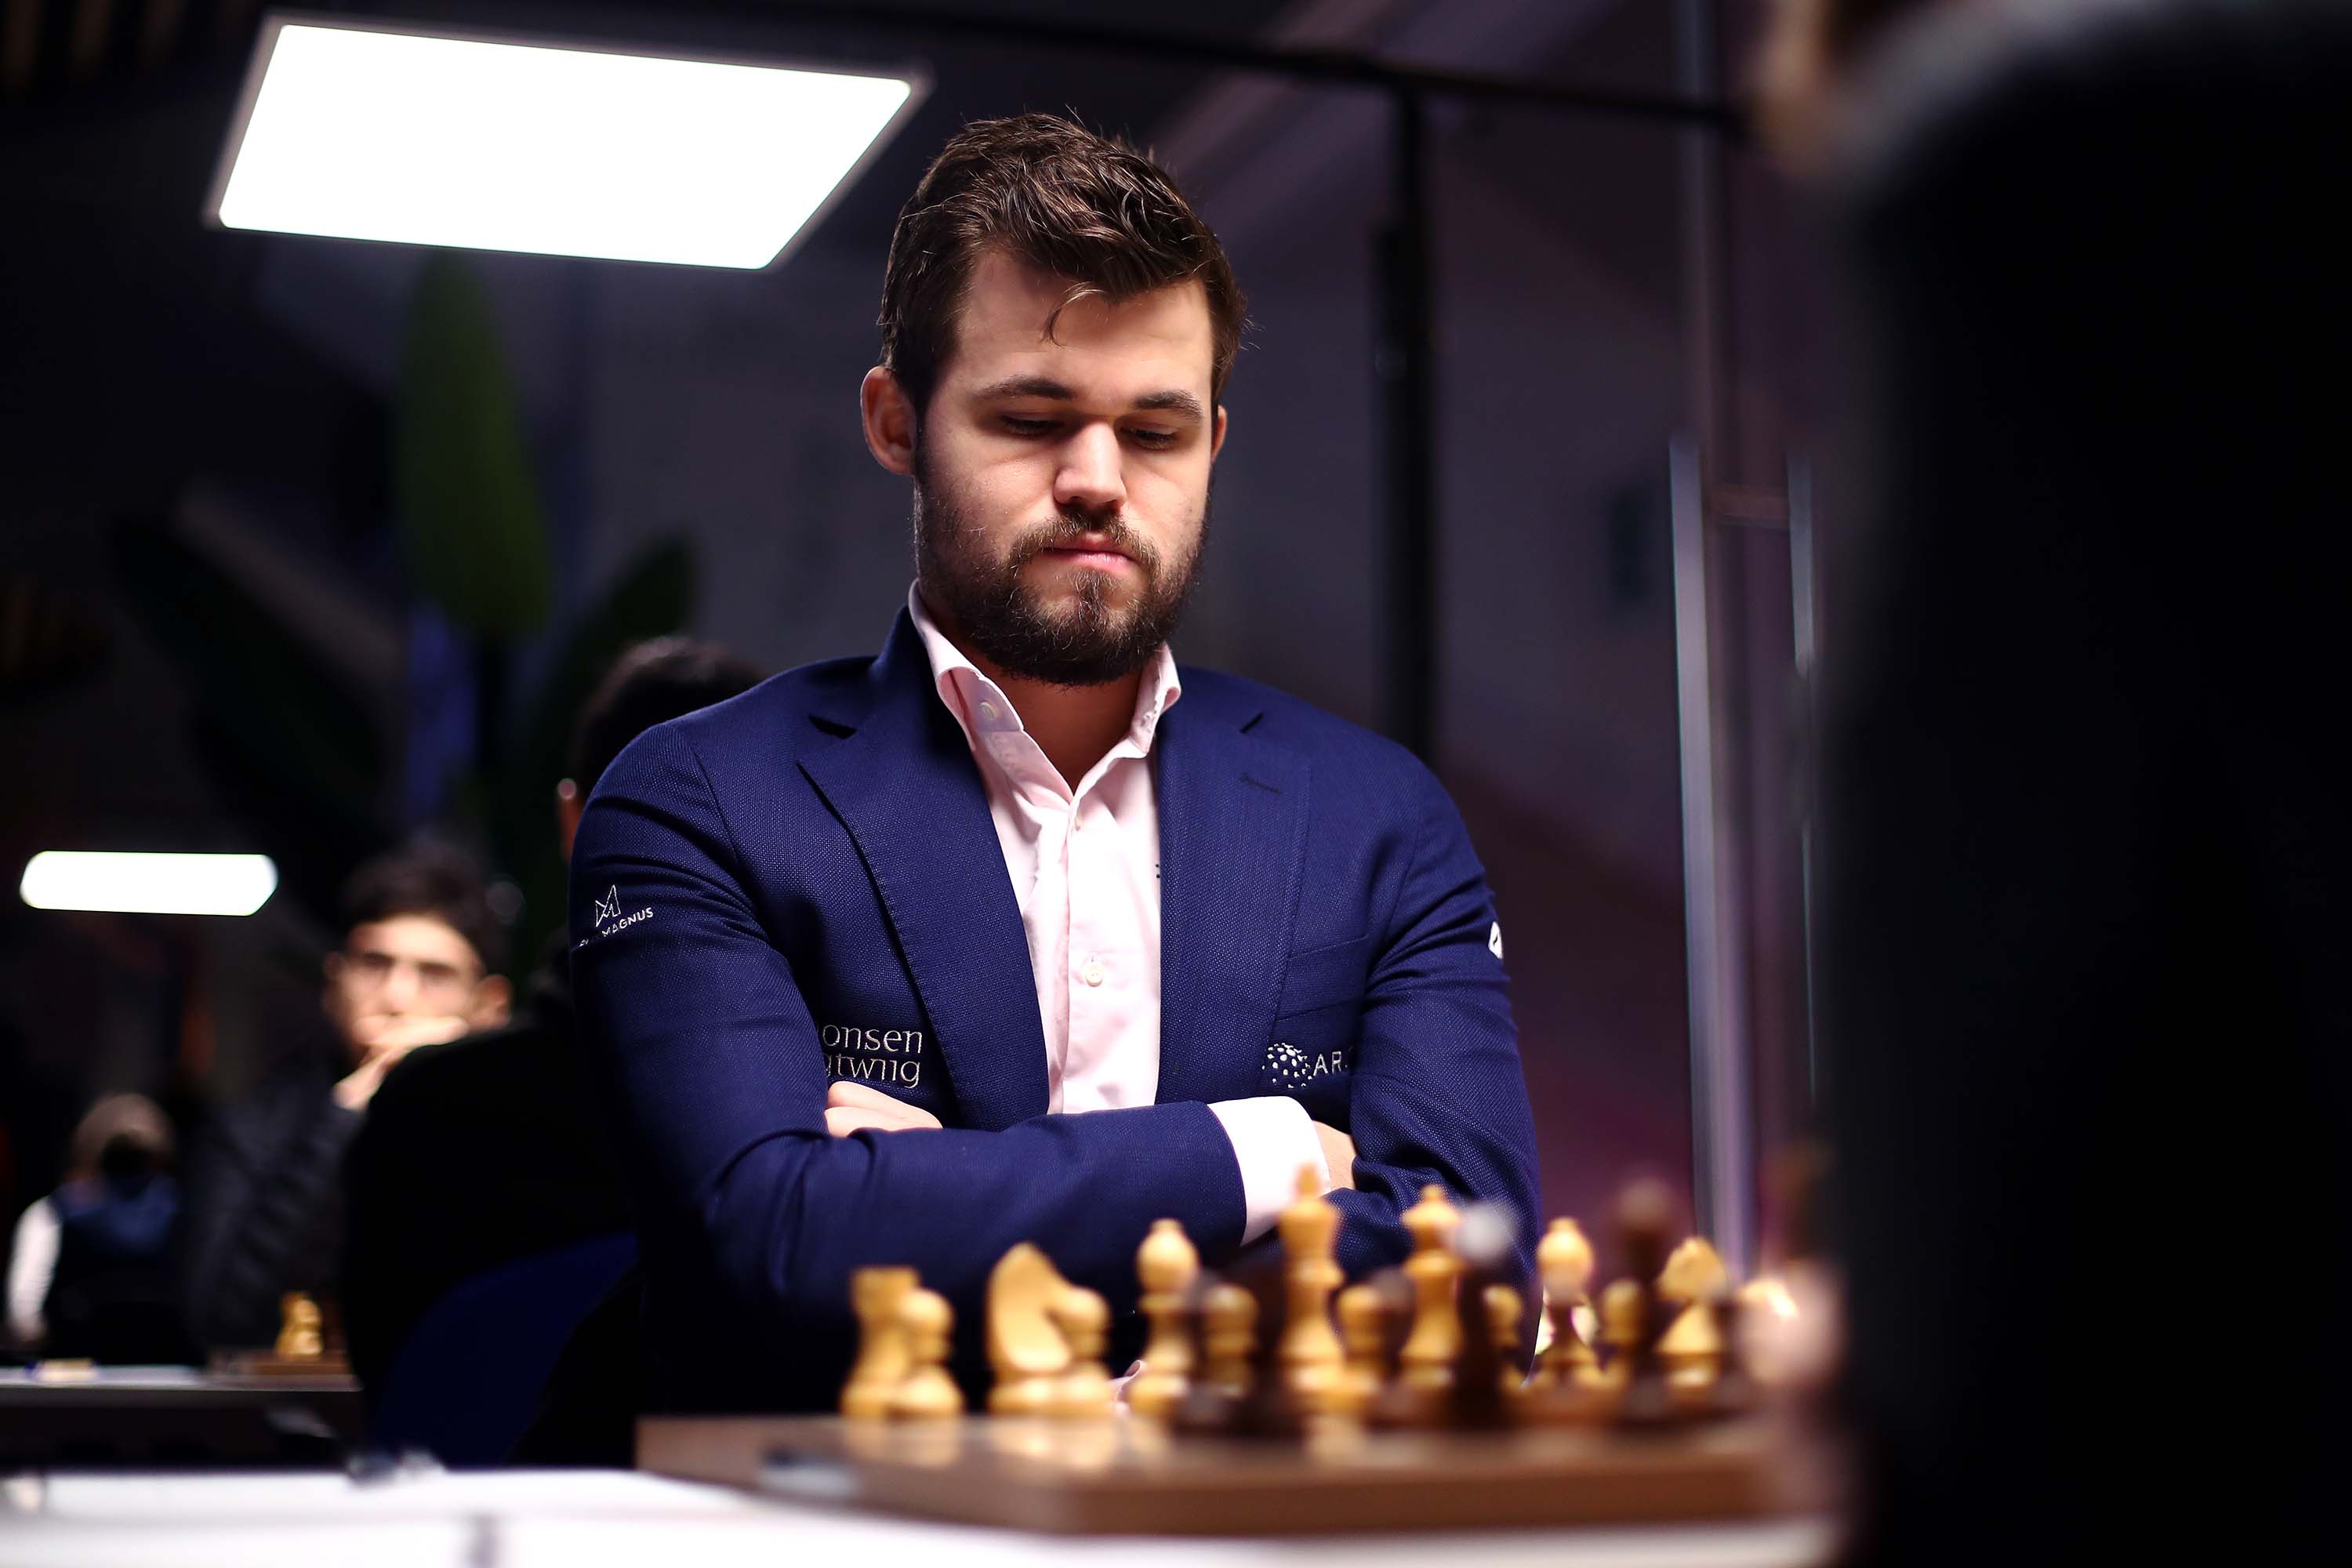 Chess grandmaster loses his spot at the top of the EPL Fantasy